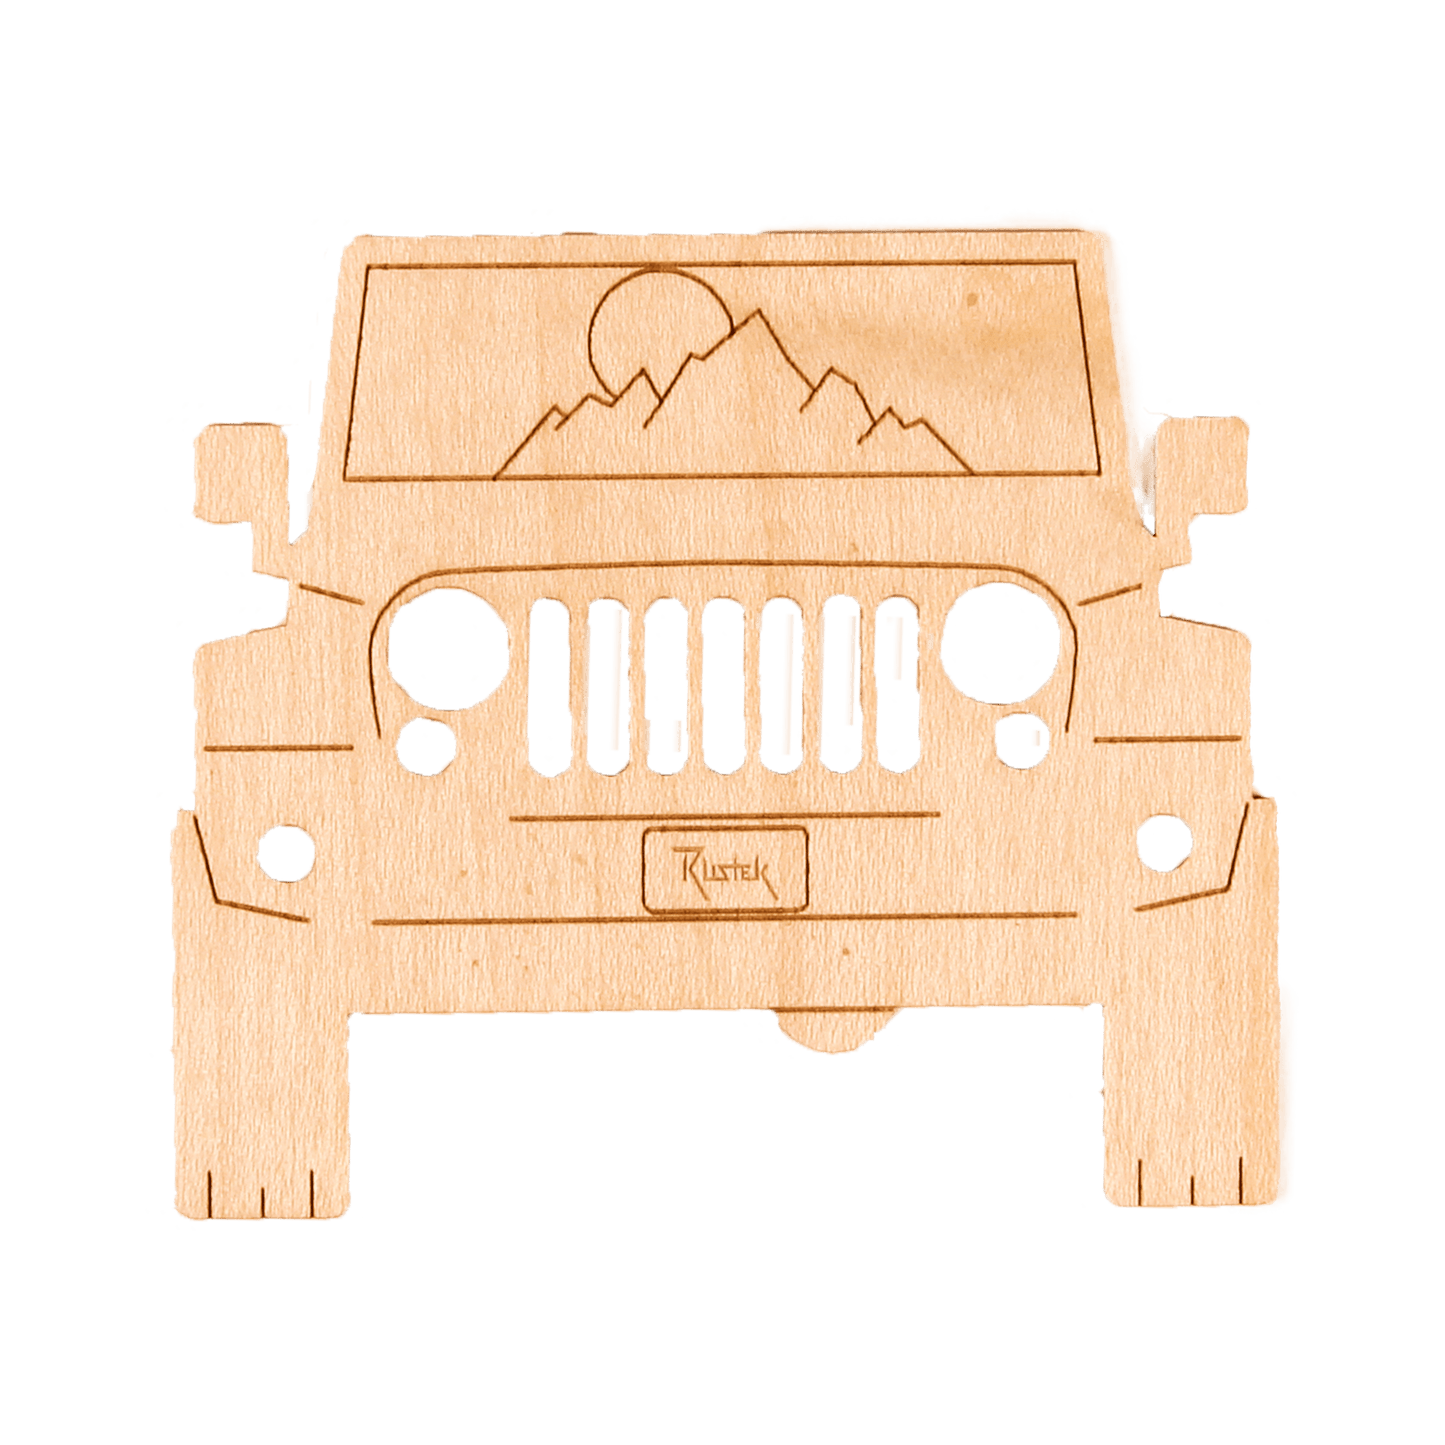 To The Mountains! Wood Sticker - Rustek